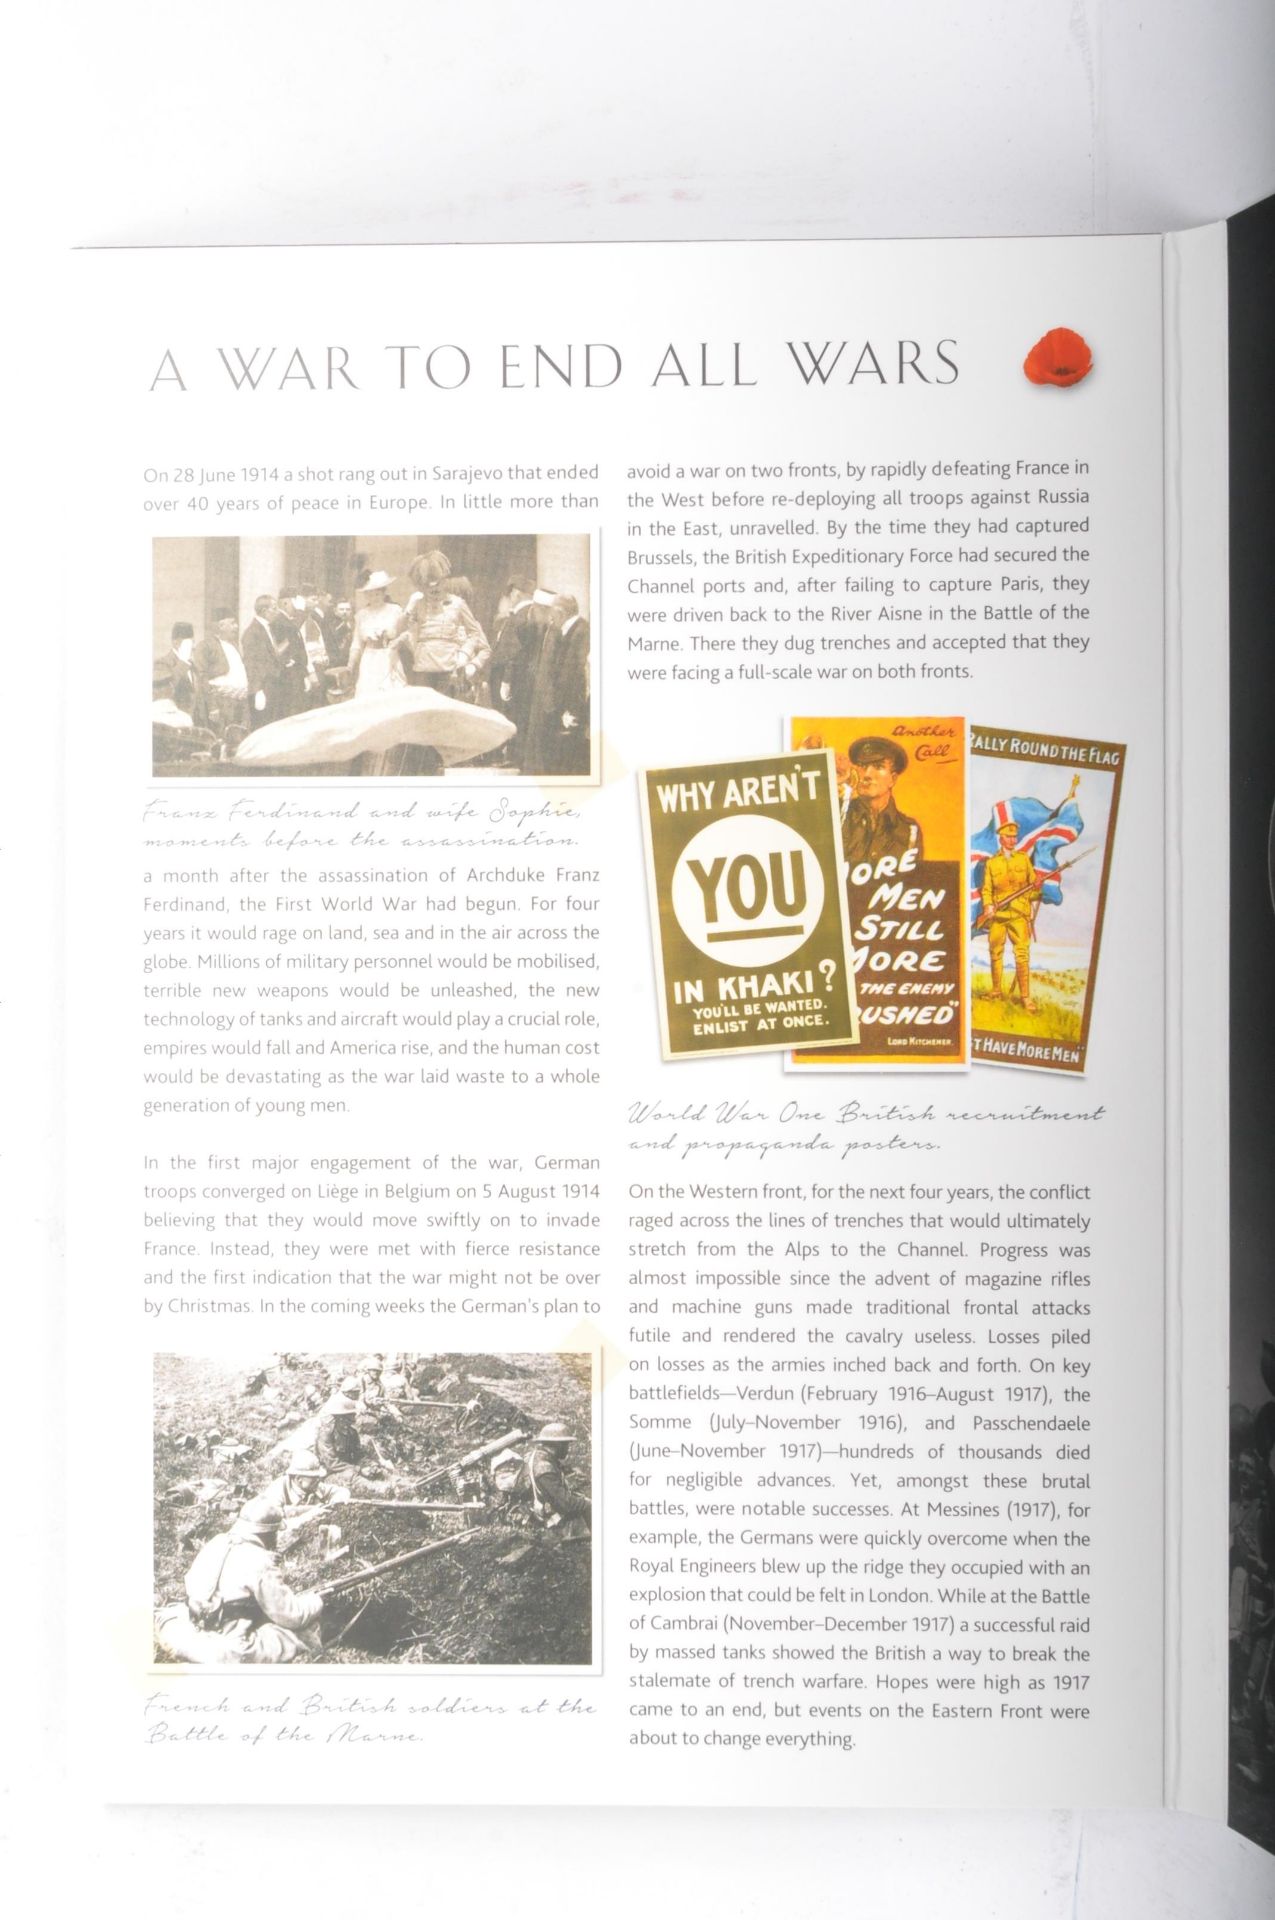 COINS - LONDON MINT - A WAR TO END ALL WARS - FIVE PROOF COIN SET - Image 2 of 5